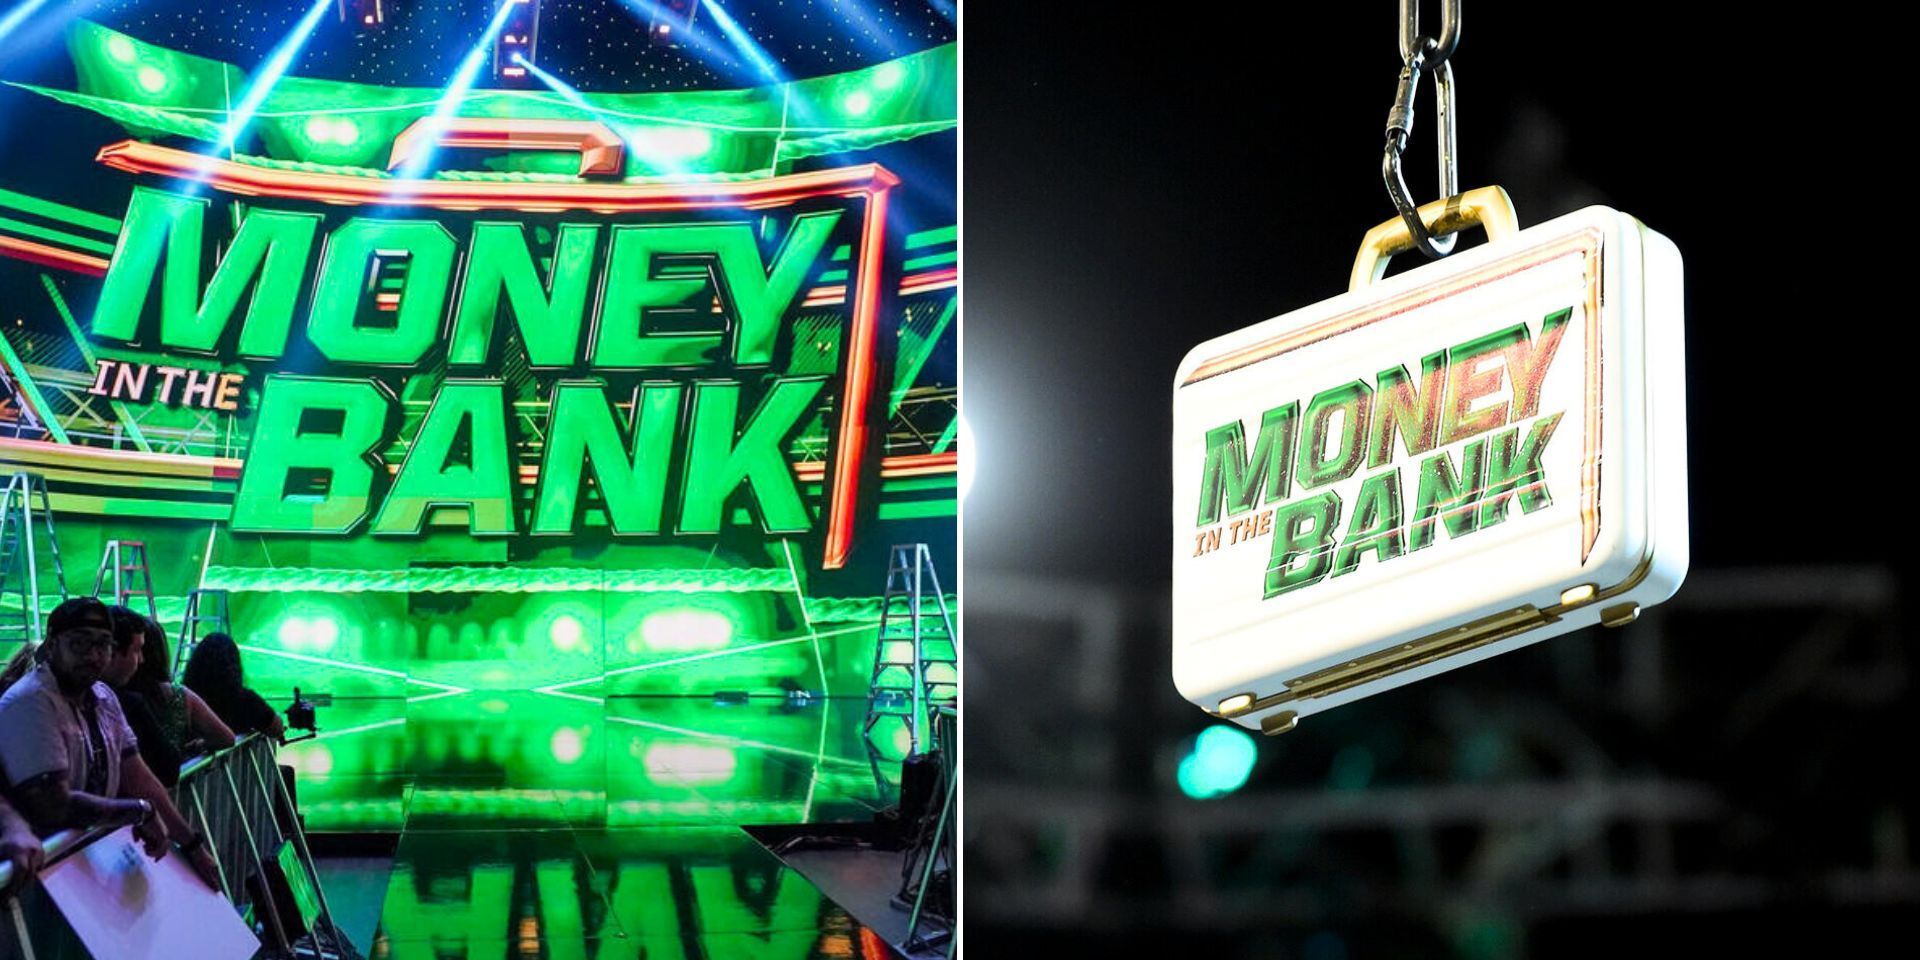 A Current star has qualified for Money in the Bank (Images via WWE.com)